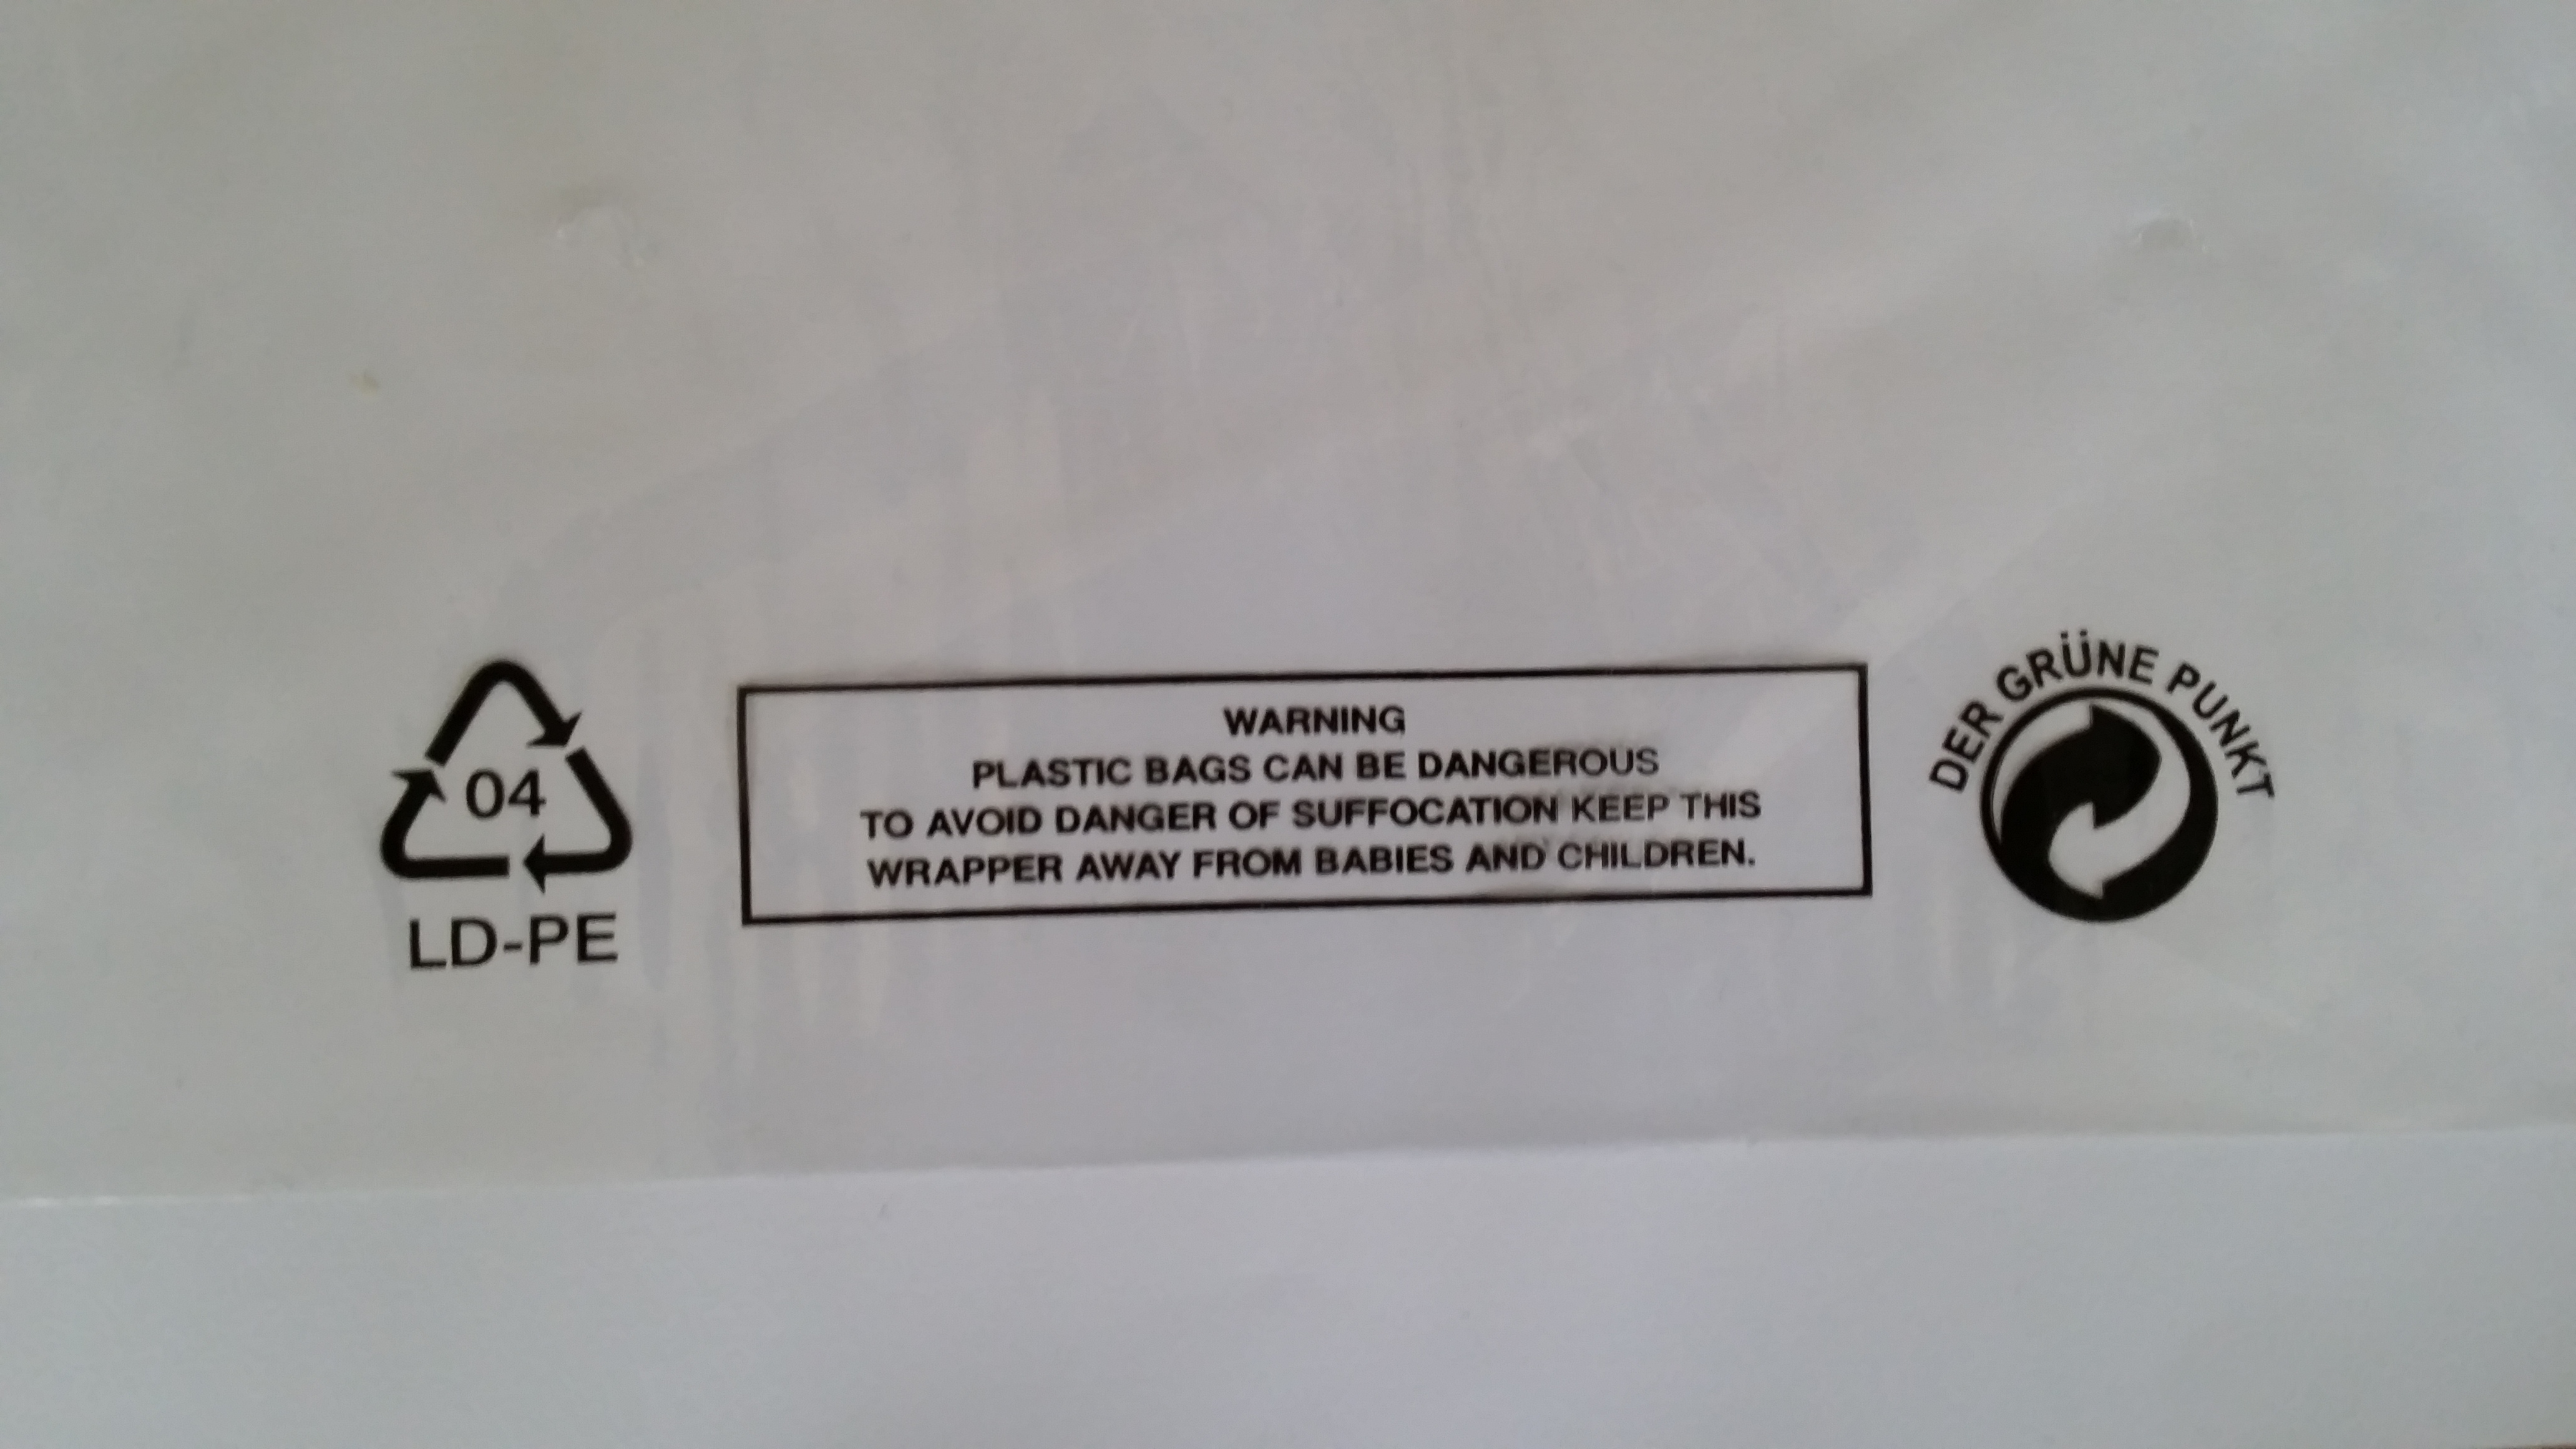 Resealable Poly Bags with Vent Hole & Suffocation Warning Message - GBE  Packaging Supplies - Wholesale Packaging, Boxes, Mailers, Bubble, Poly Bags  - Product Packaging Supplies